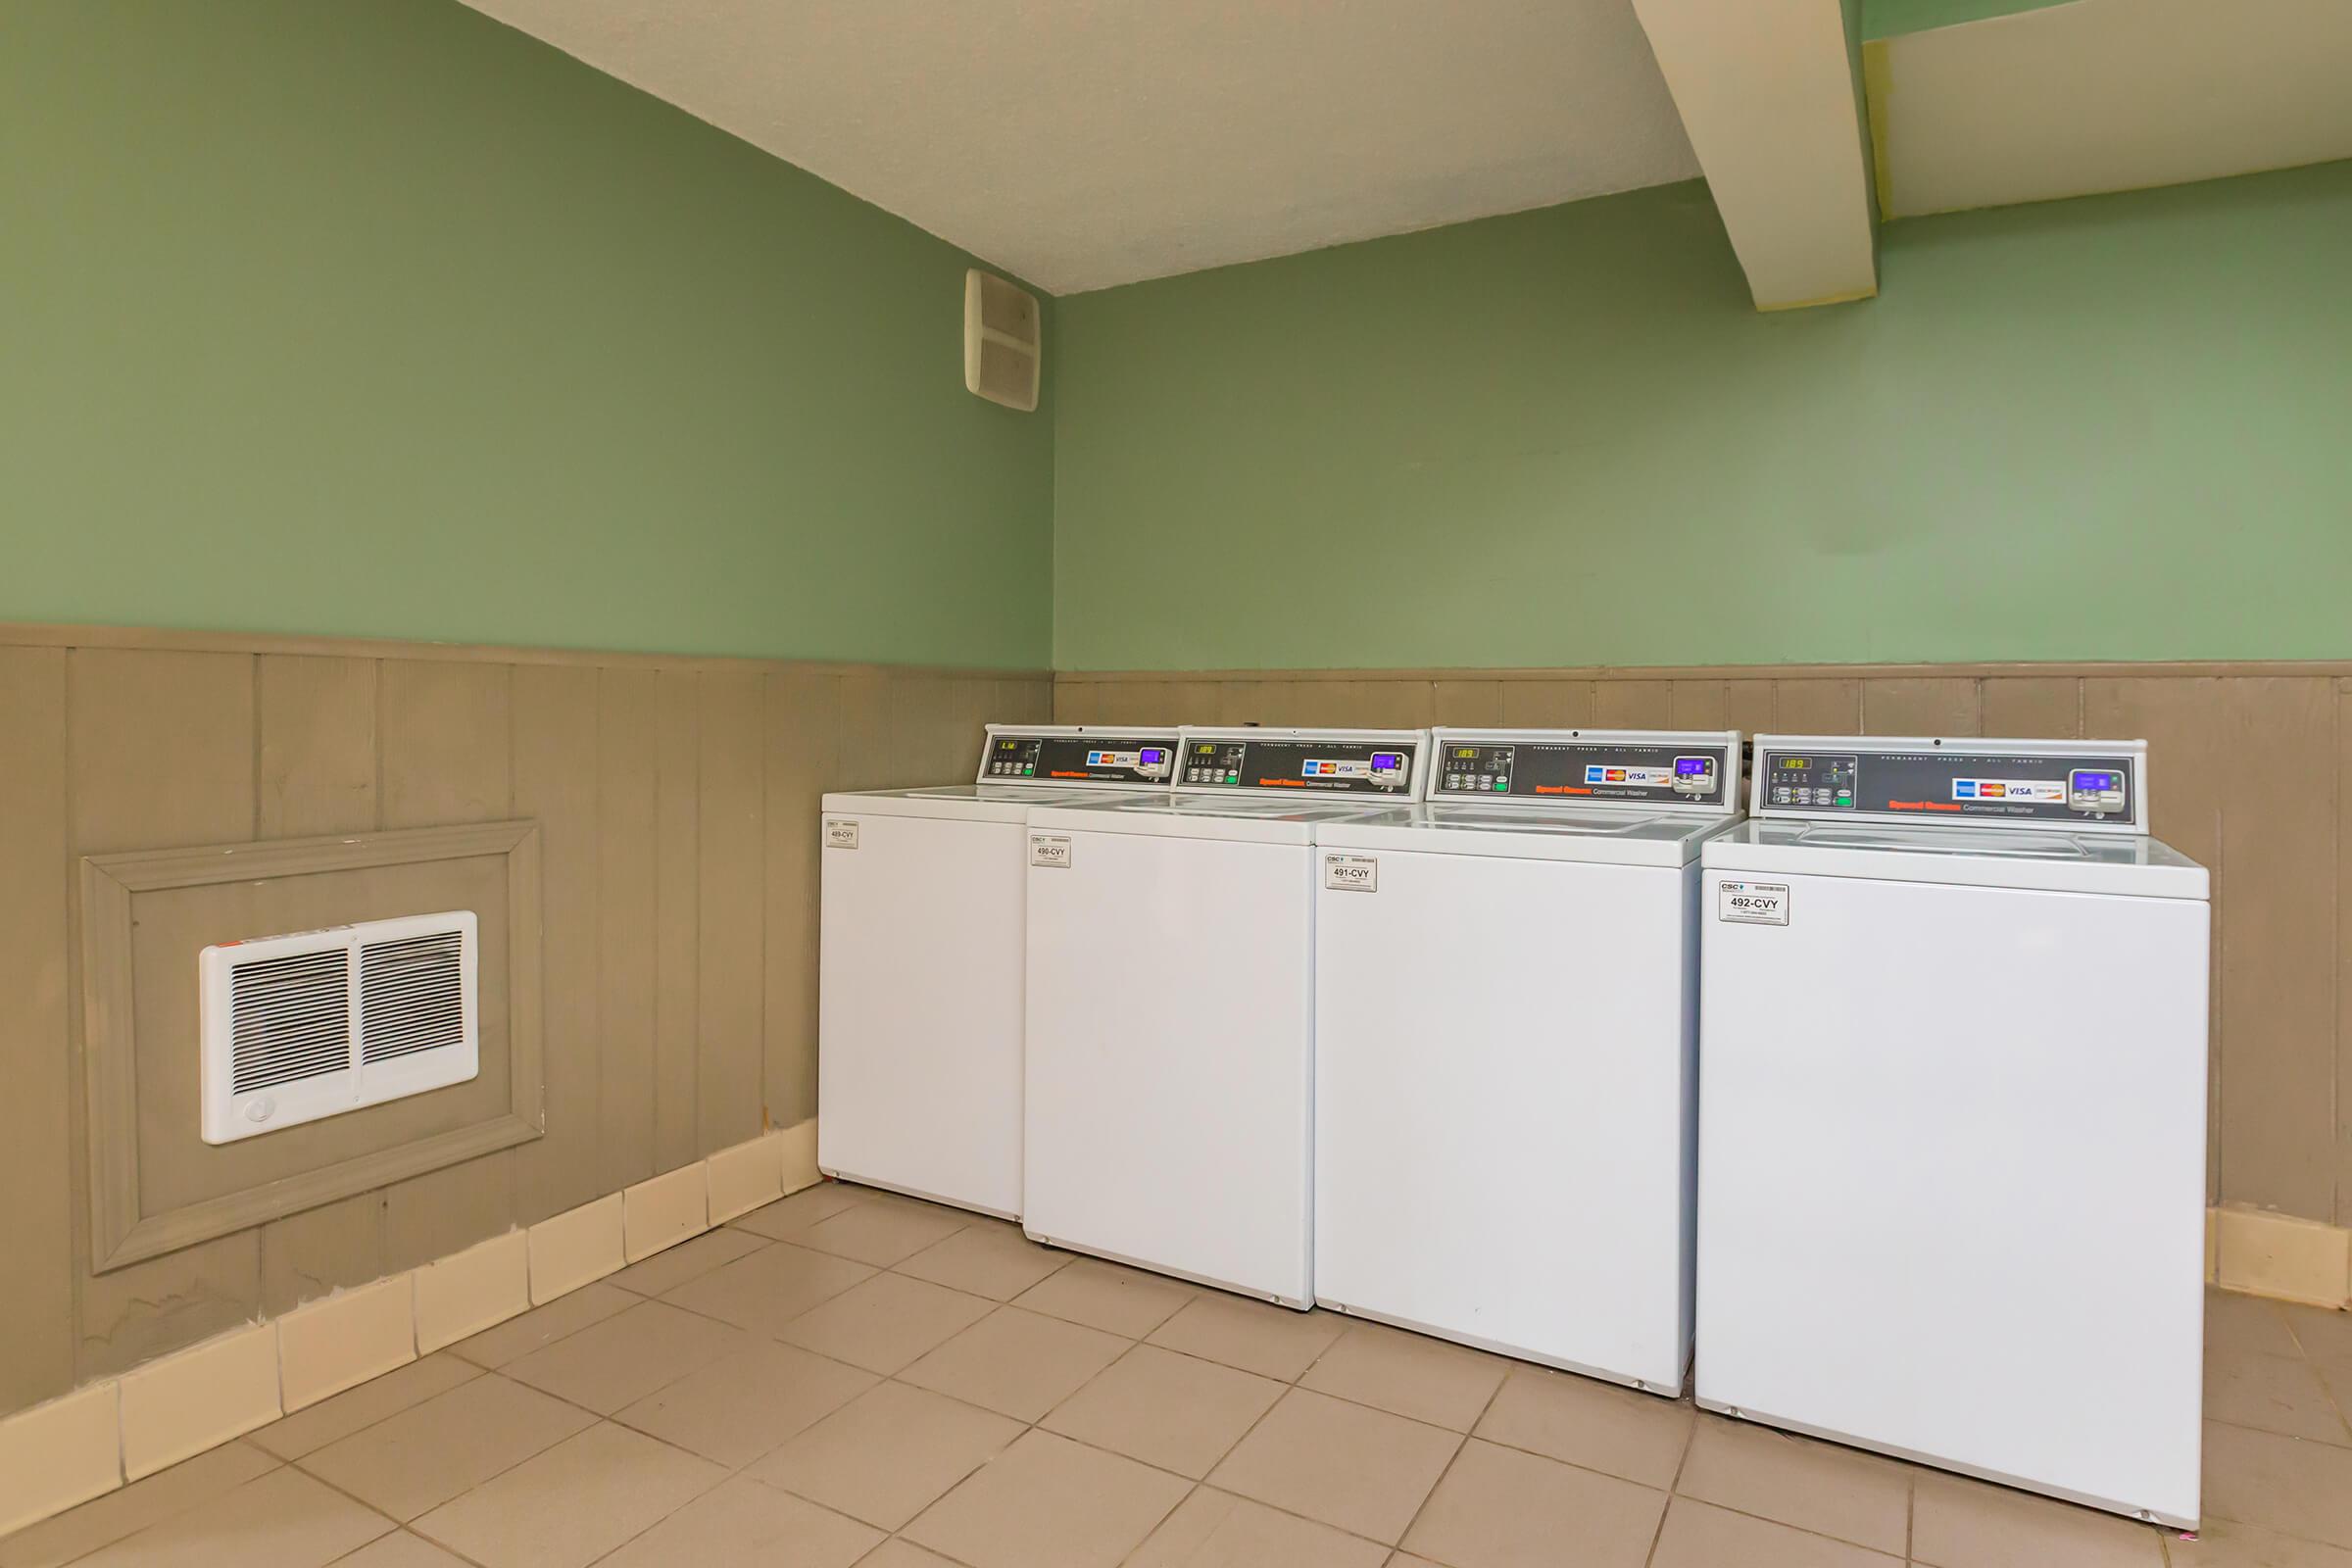 24-HOUR SMART CARD LAUNDRY FACILITIES